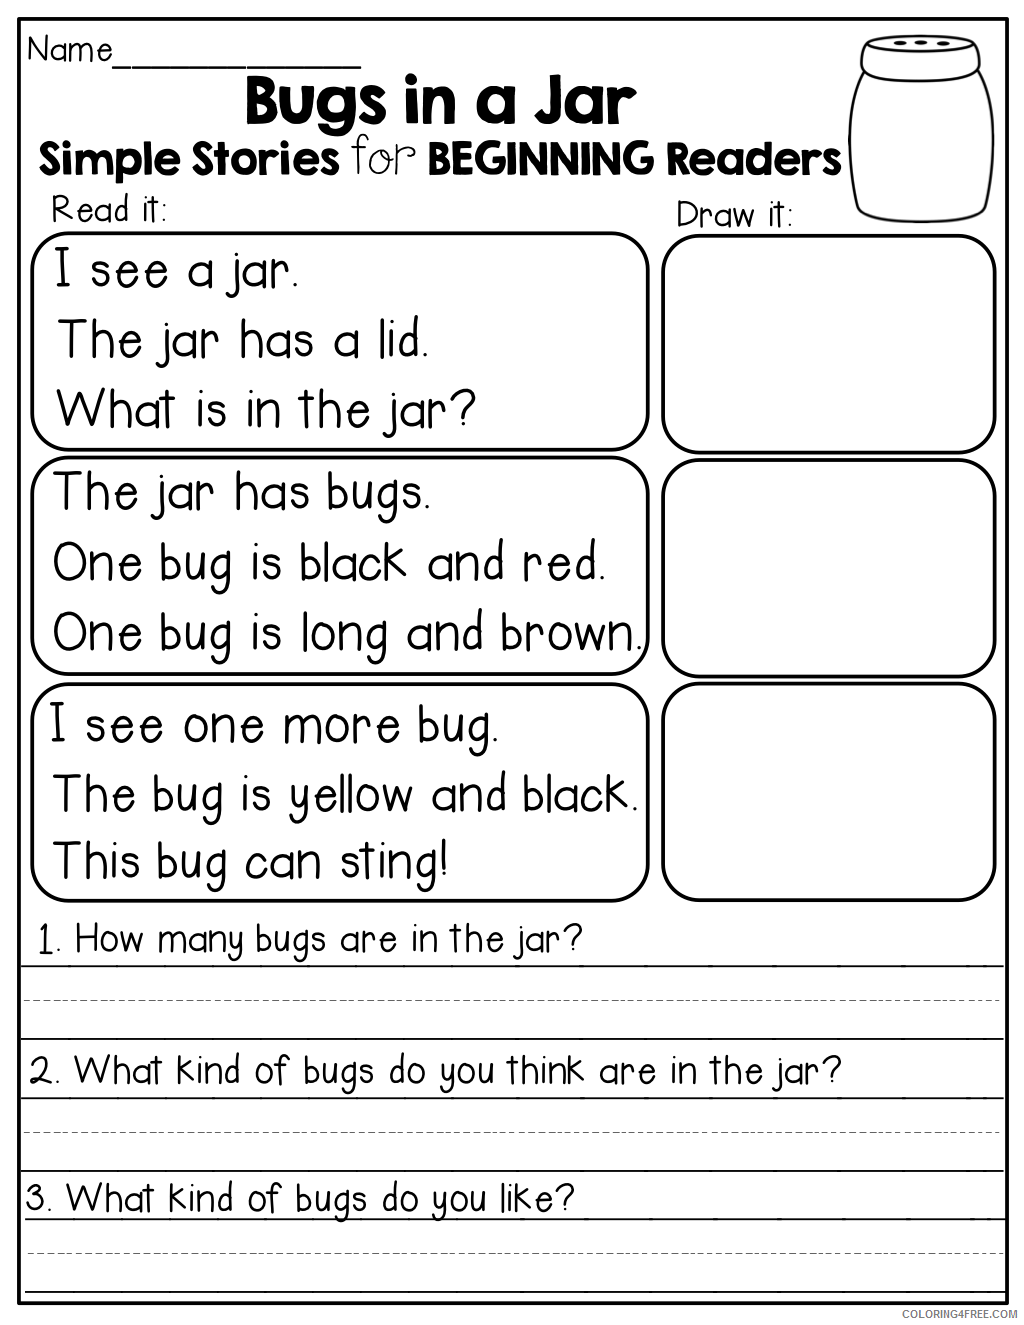 2nd Grade Coloring Pages Educational Reading Stories Worksheets Print 2020 0162 Coloring4free